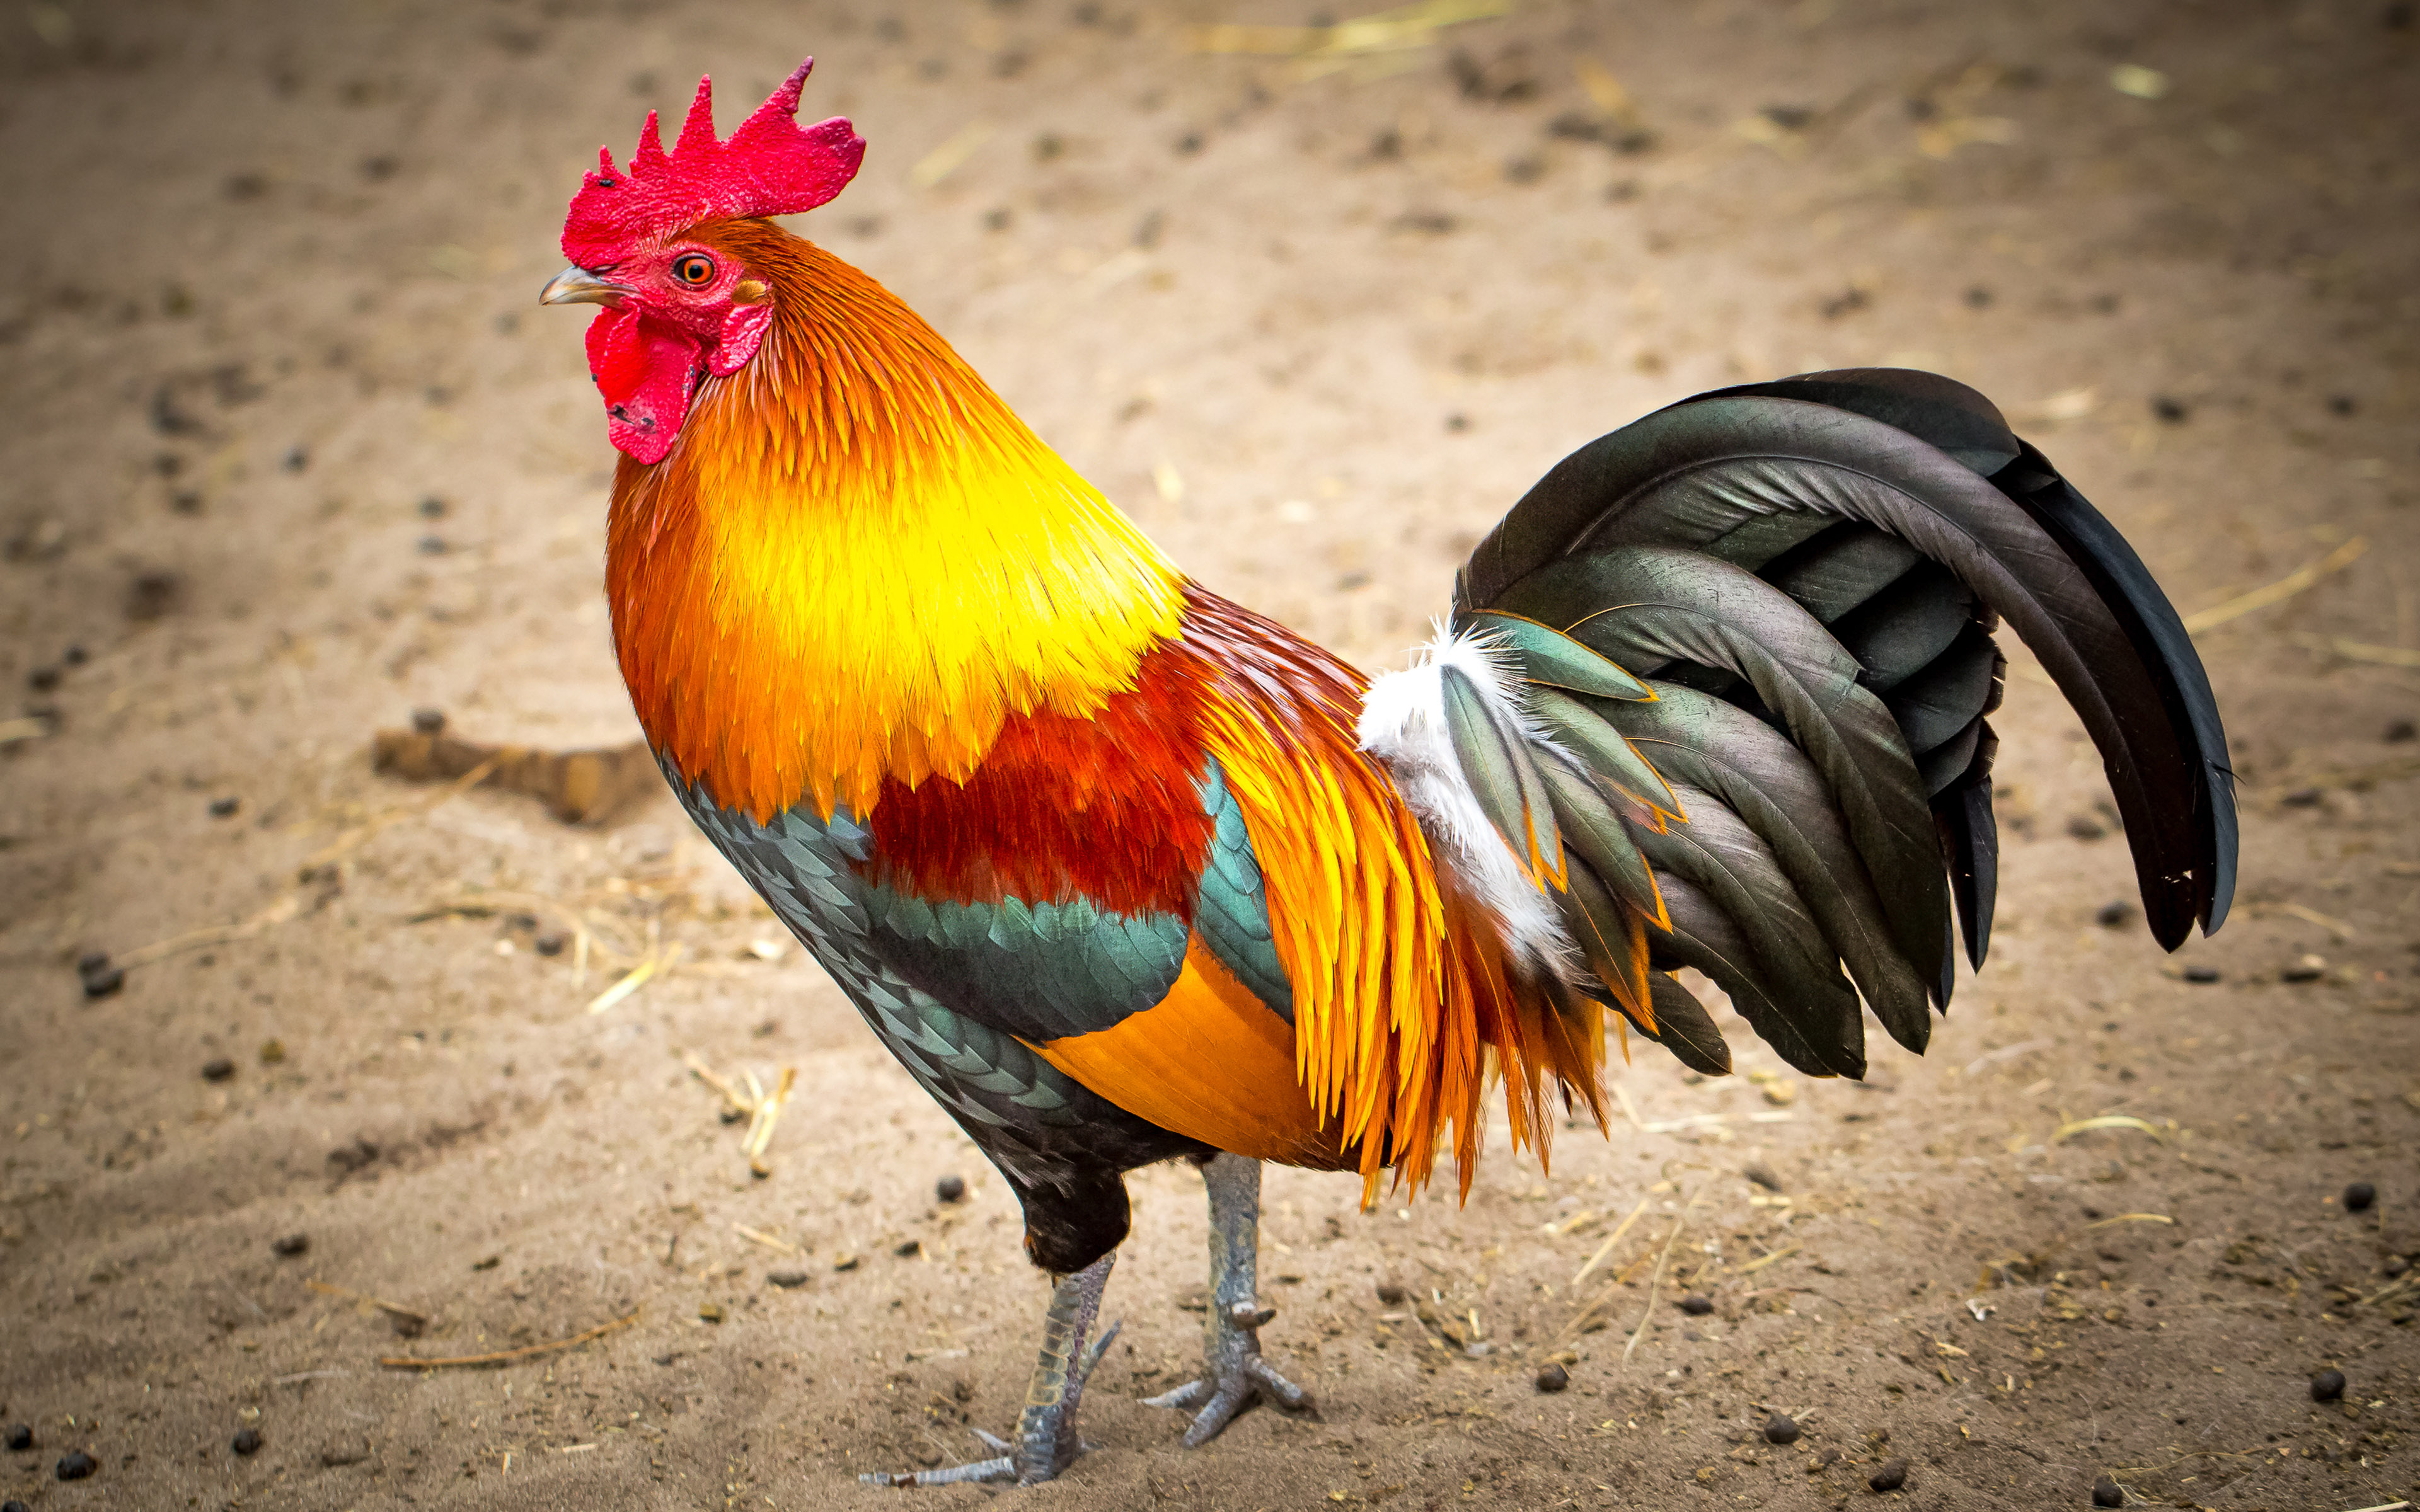 Rooster With Beautiful Colorful Feathers Reddish Orange Neck Blue Gray Feathers On Breast Tailed